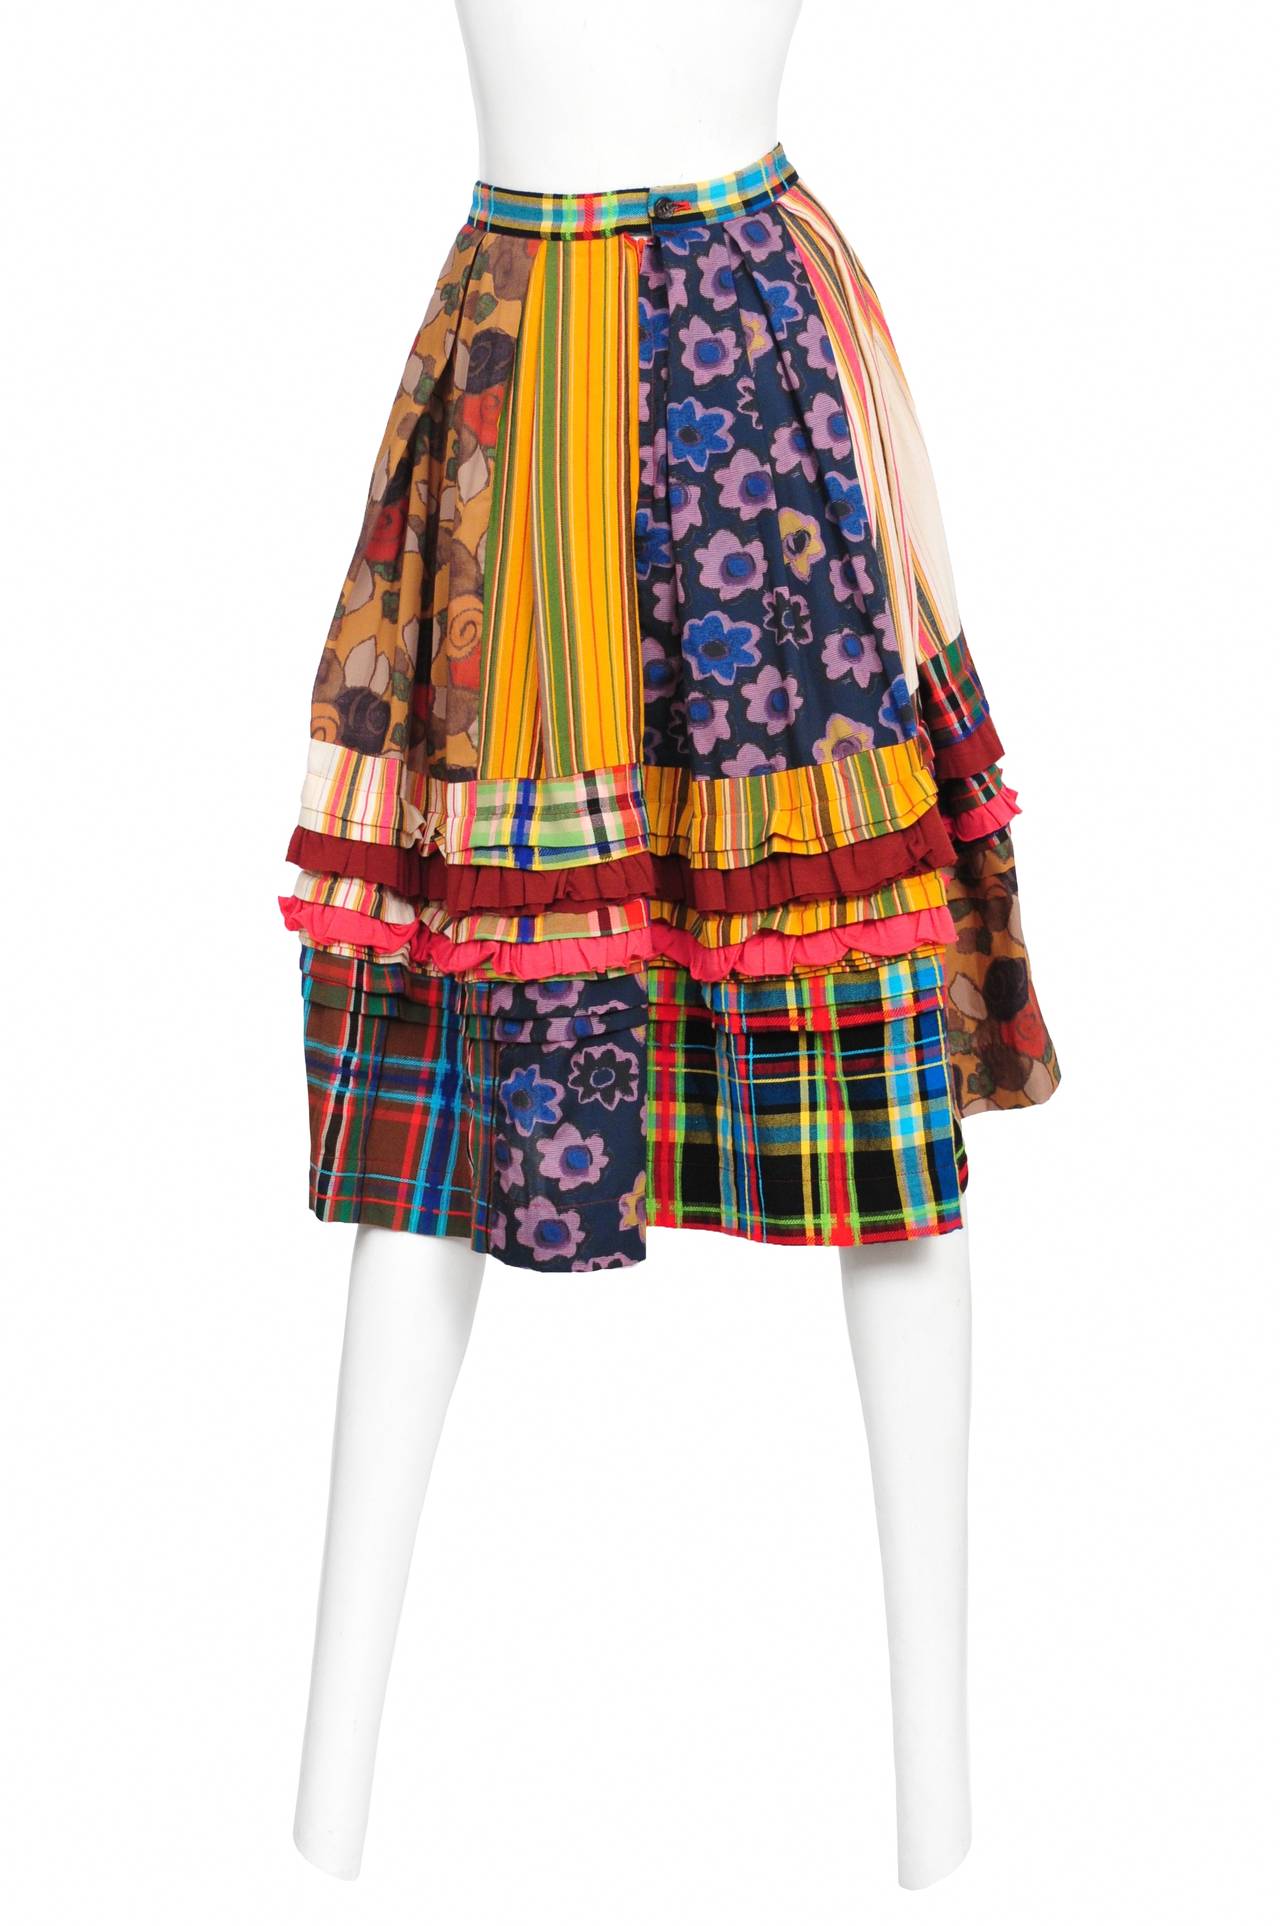 Vintage Comme des Garcons skirt featuring various tiers of patchwork printed fabric with ruffles in between.